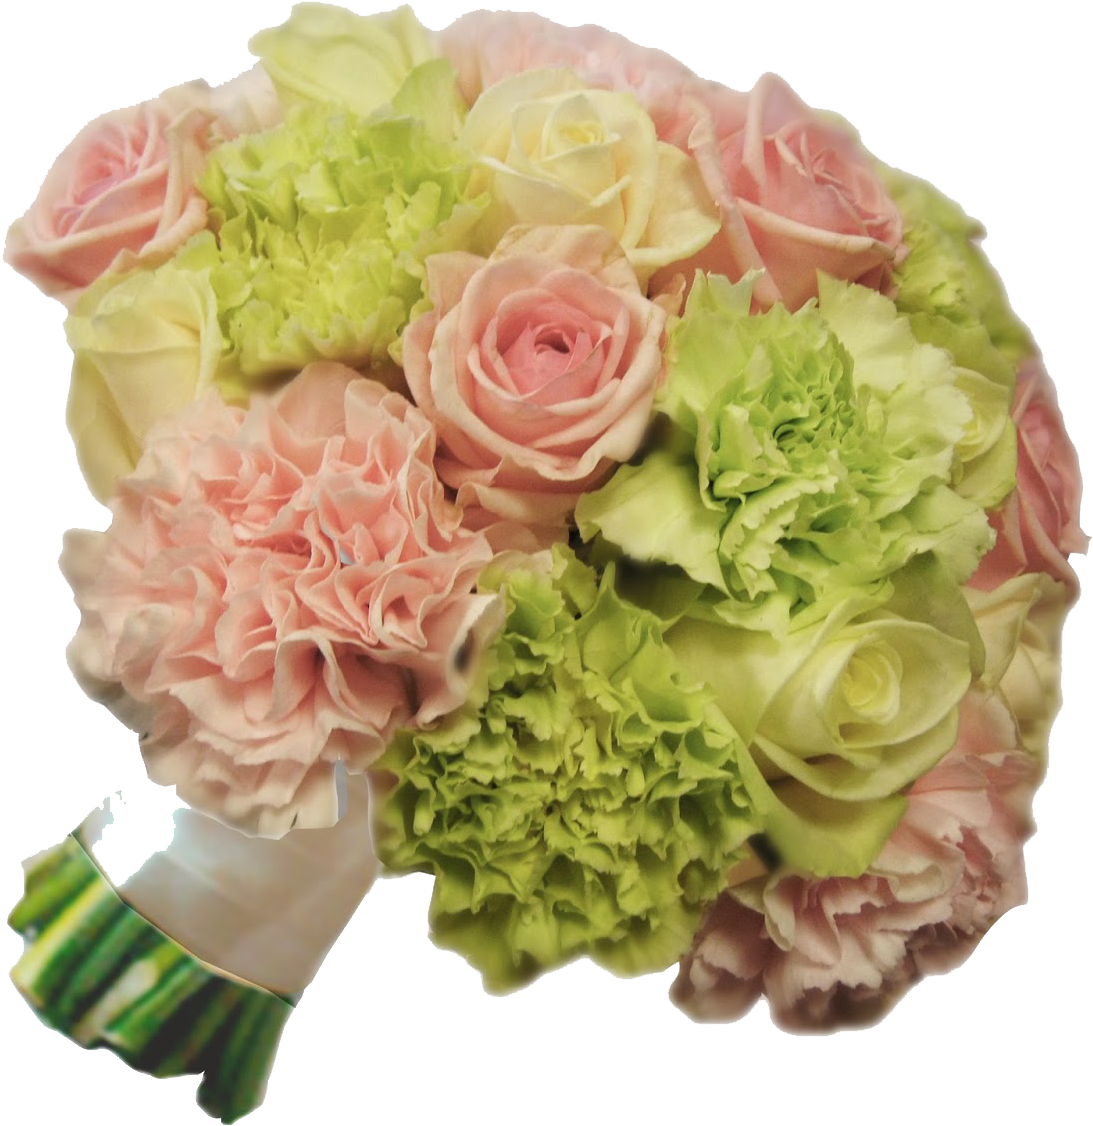 Wedding Flowers Png 1093 X 1126